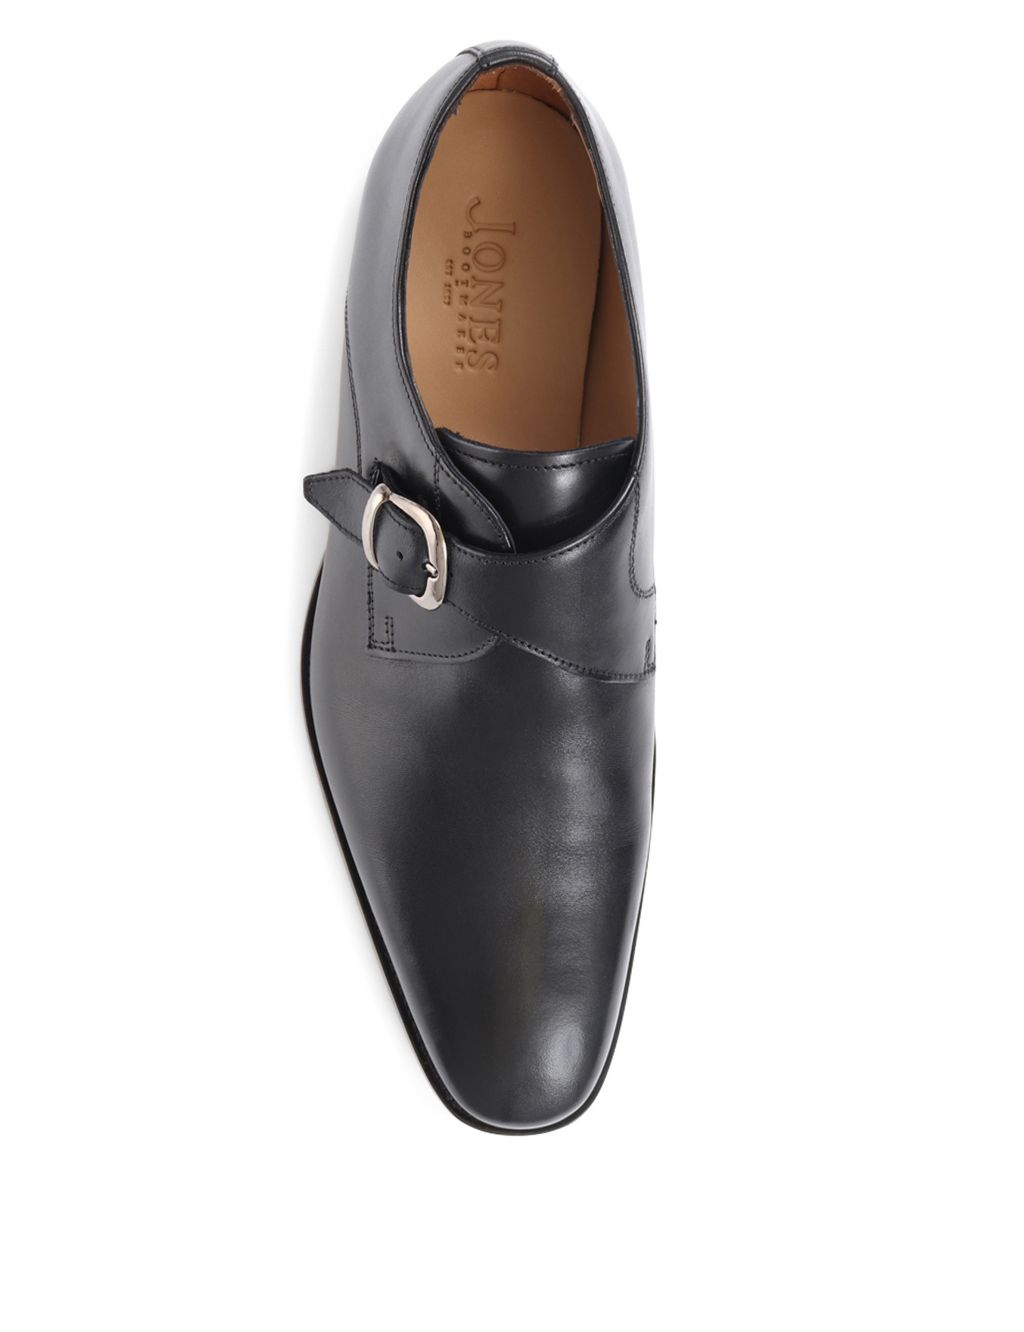 Leather Monk Strap Shoes image 5